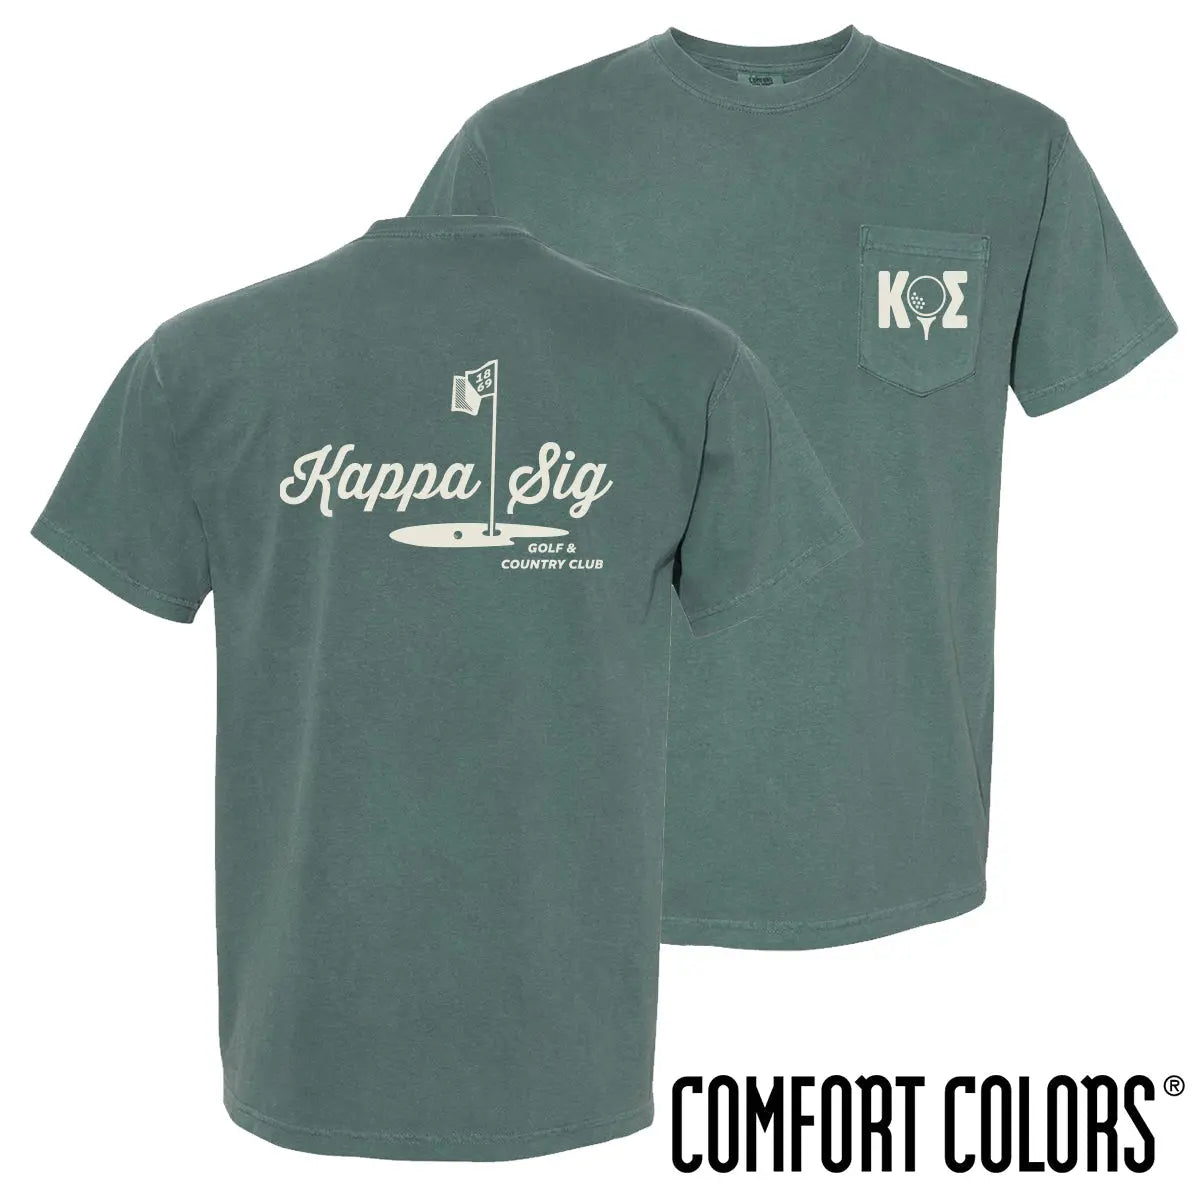 New! Kappa Sig Comfort Colors Par For The Course Short Sleeve Tee